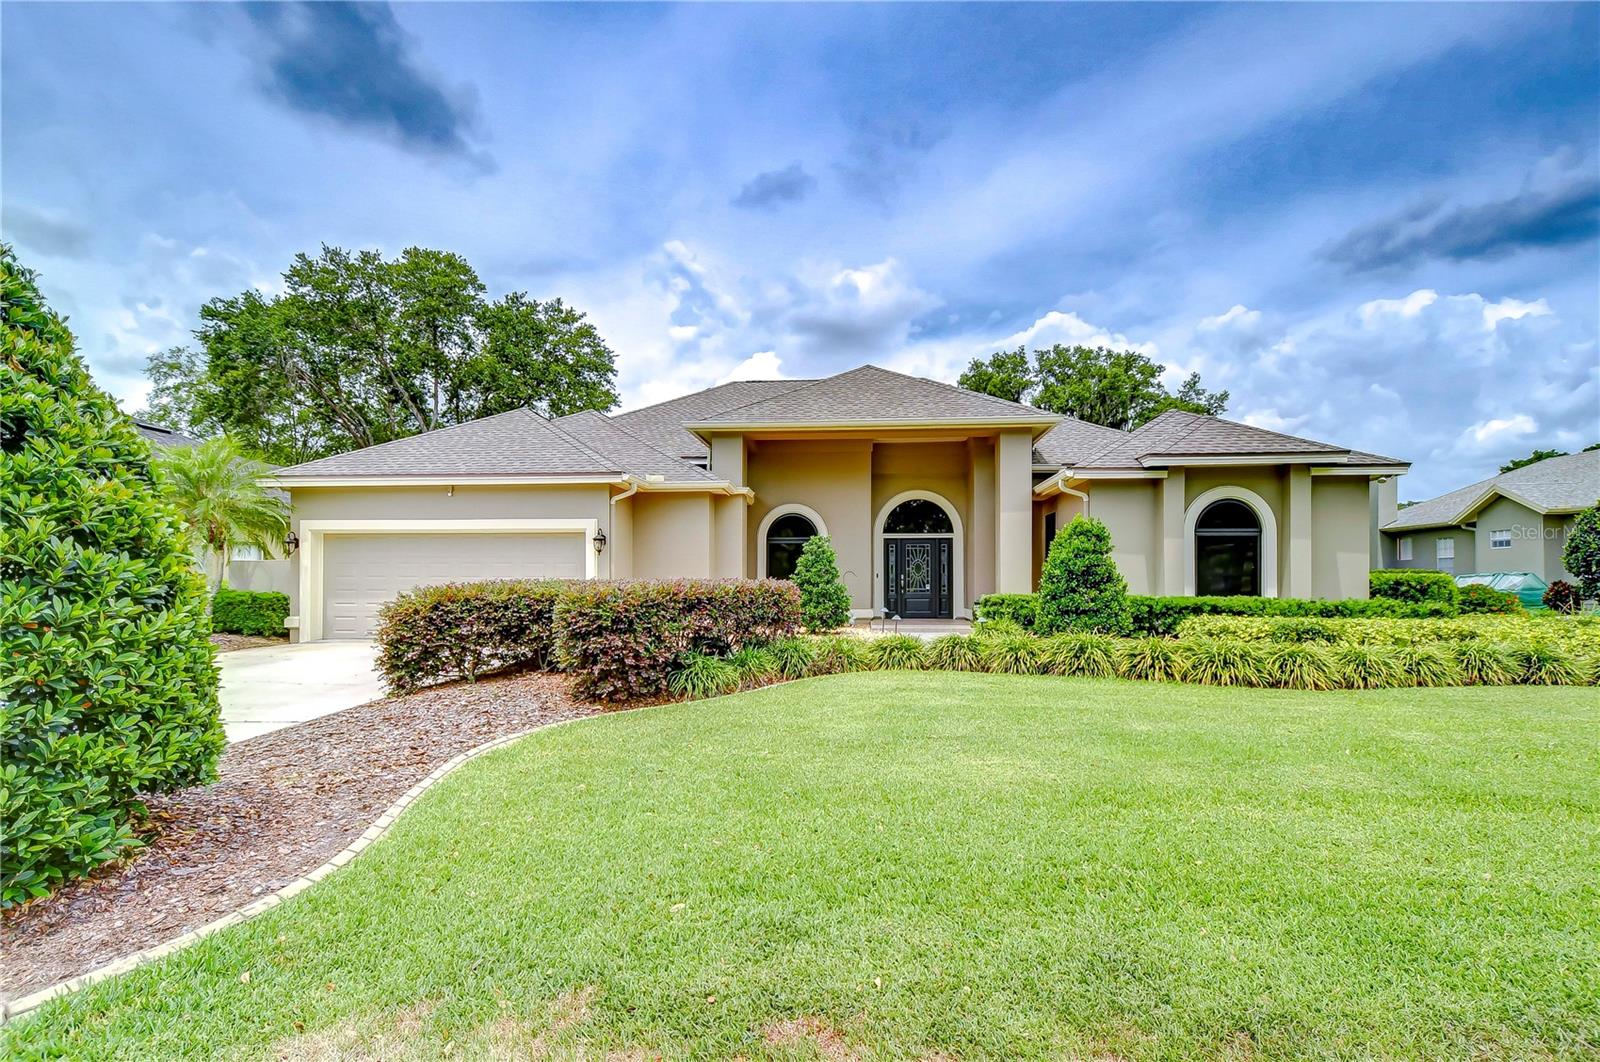 Spectacular pool home nestled on an oversized lot in desirable River Hills community!